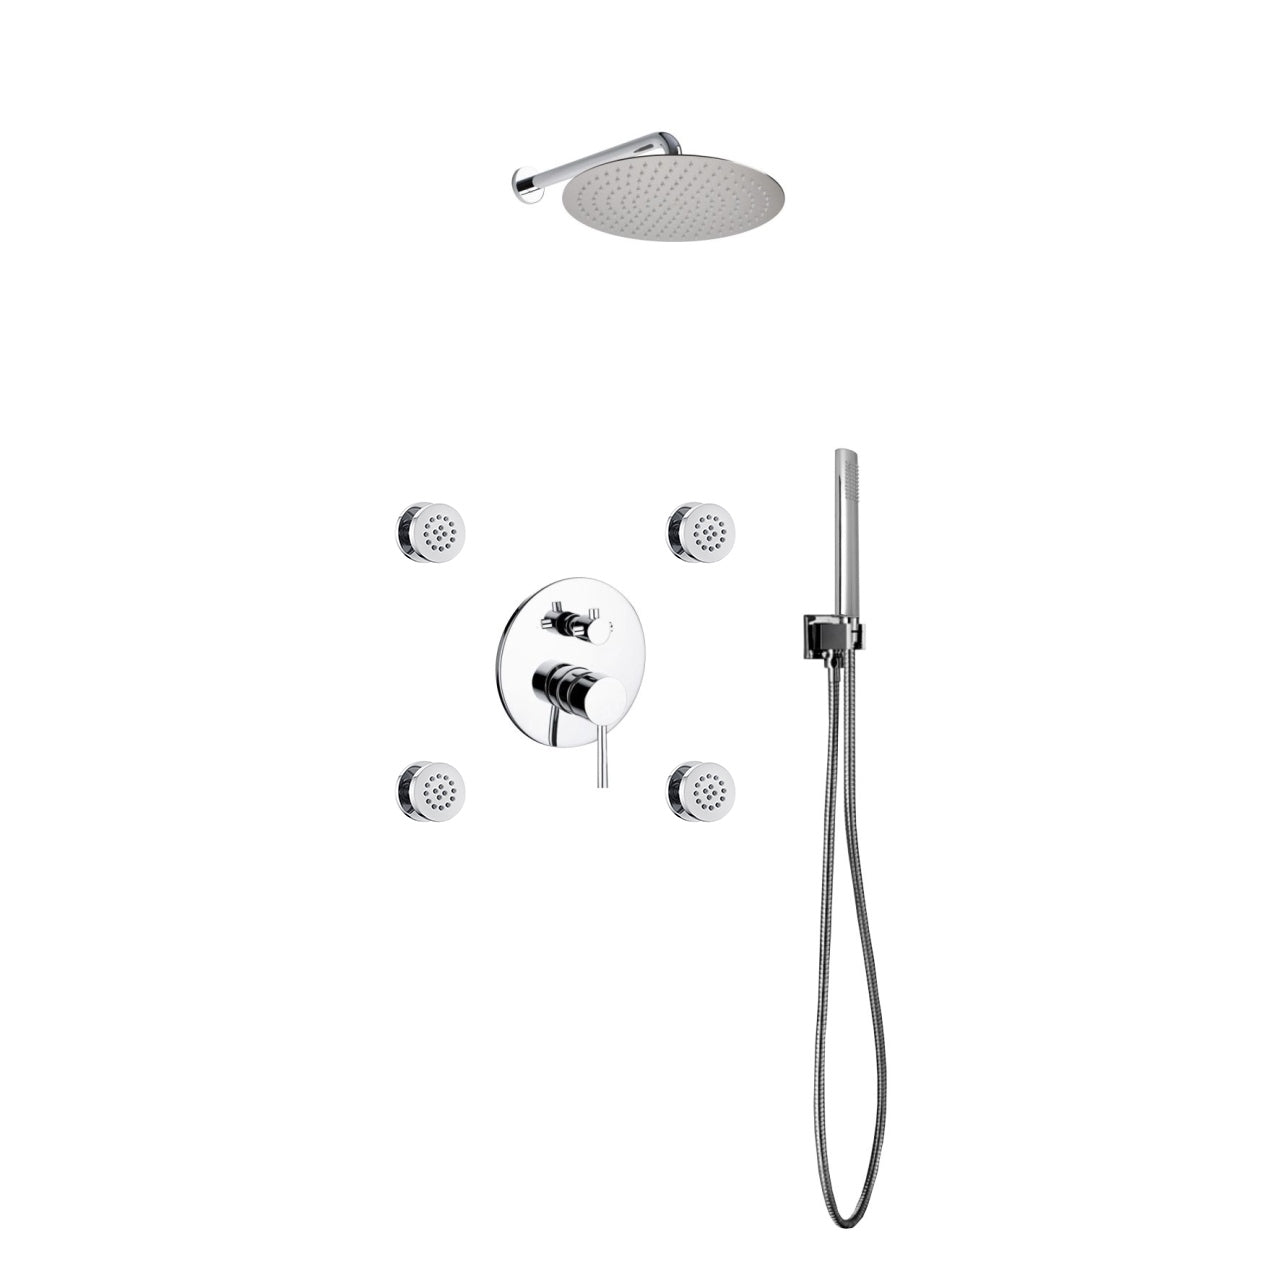 Aqua Rondo Brass Shower Set with Square Rain Shower, 4 Body Jets and Handheld - Home and Bath Depot